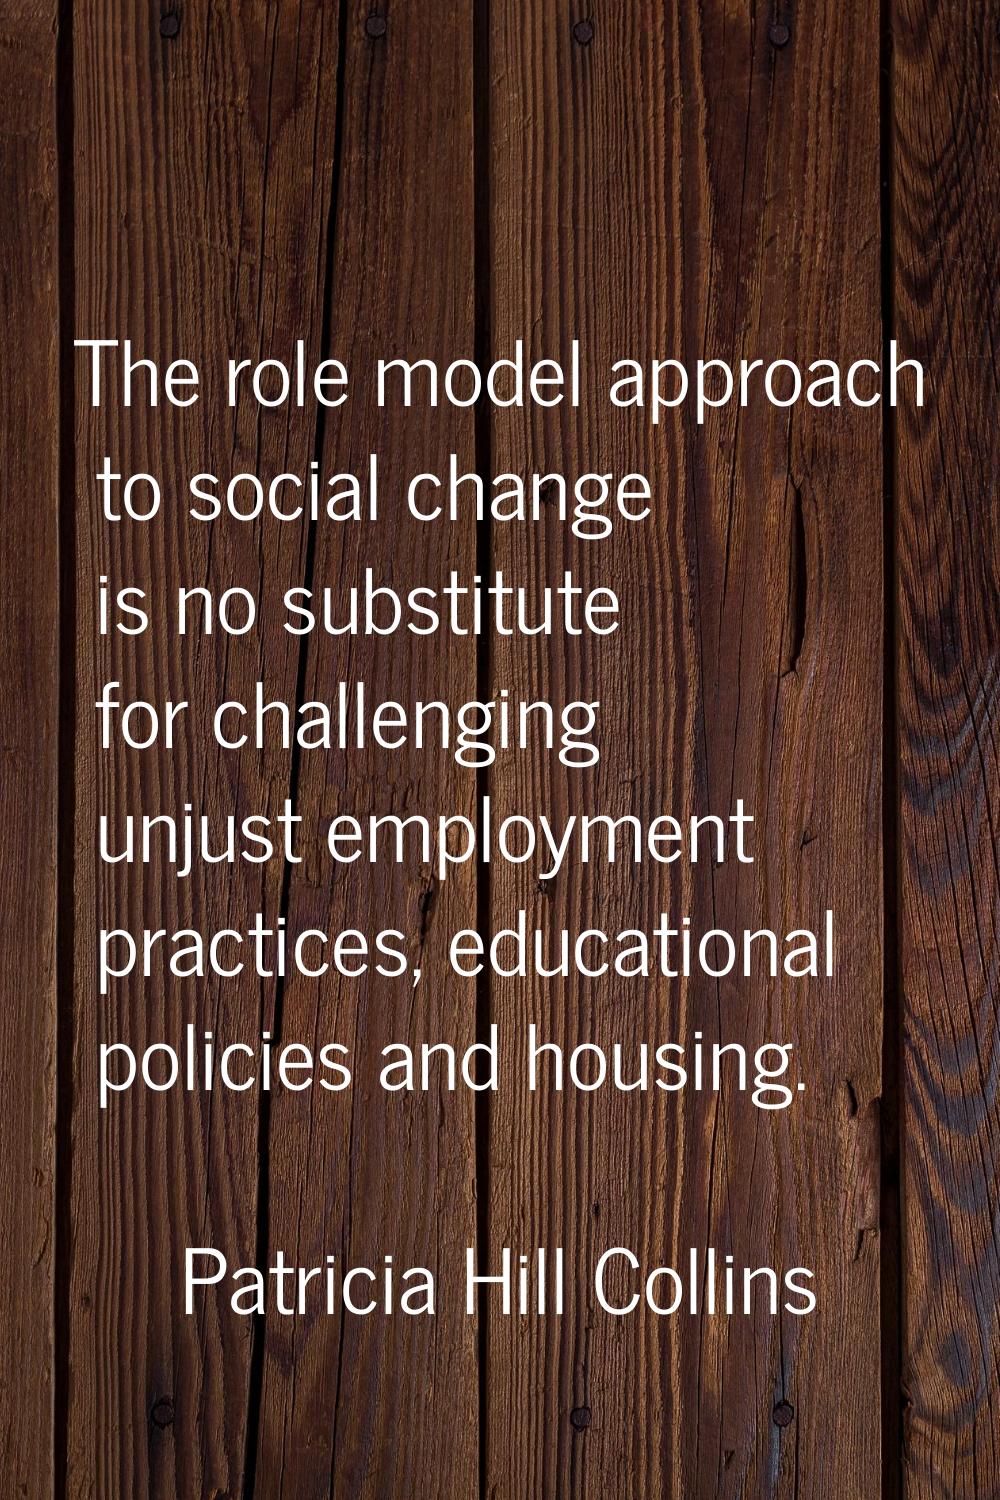 The role model approach to social change is no substitute for challenging unjust employment practic